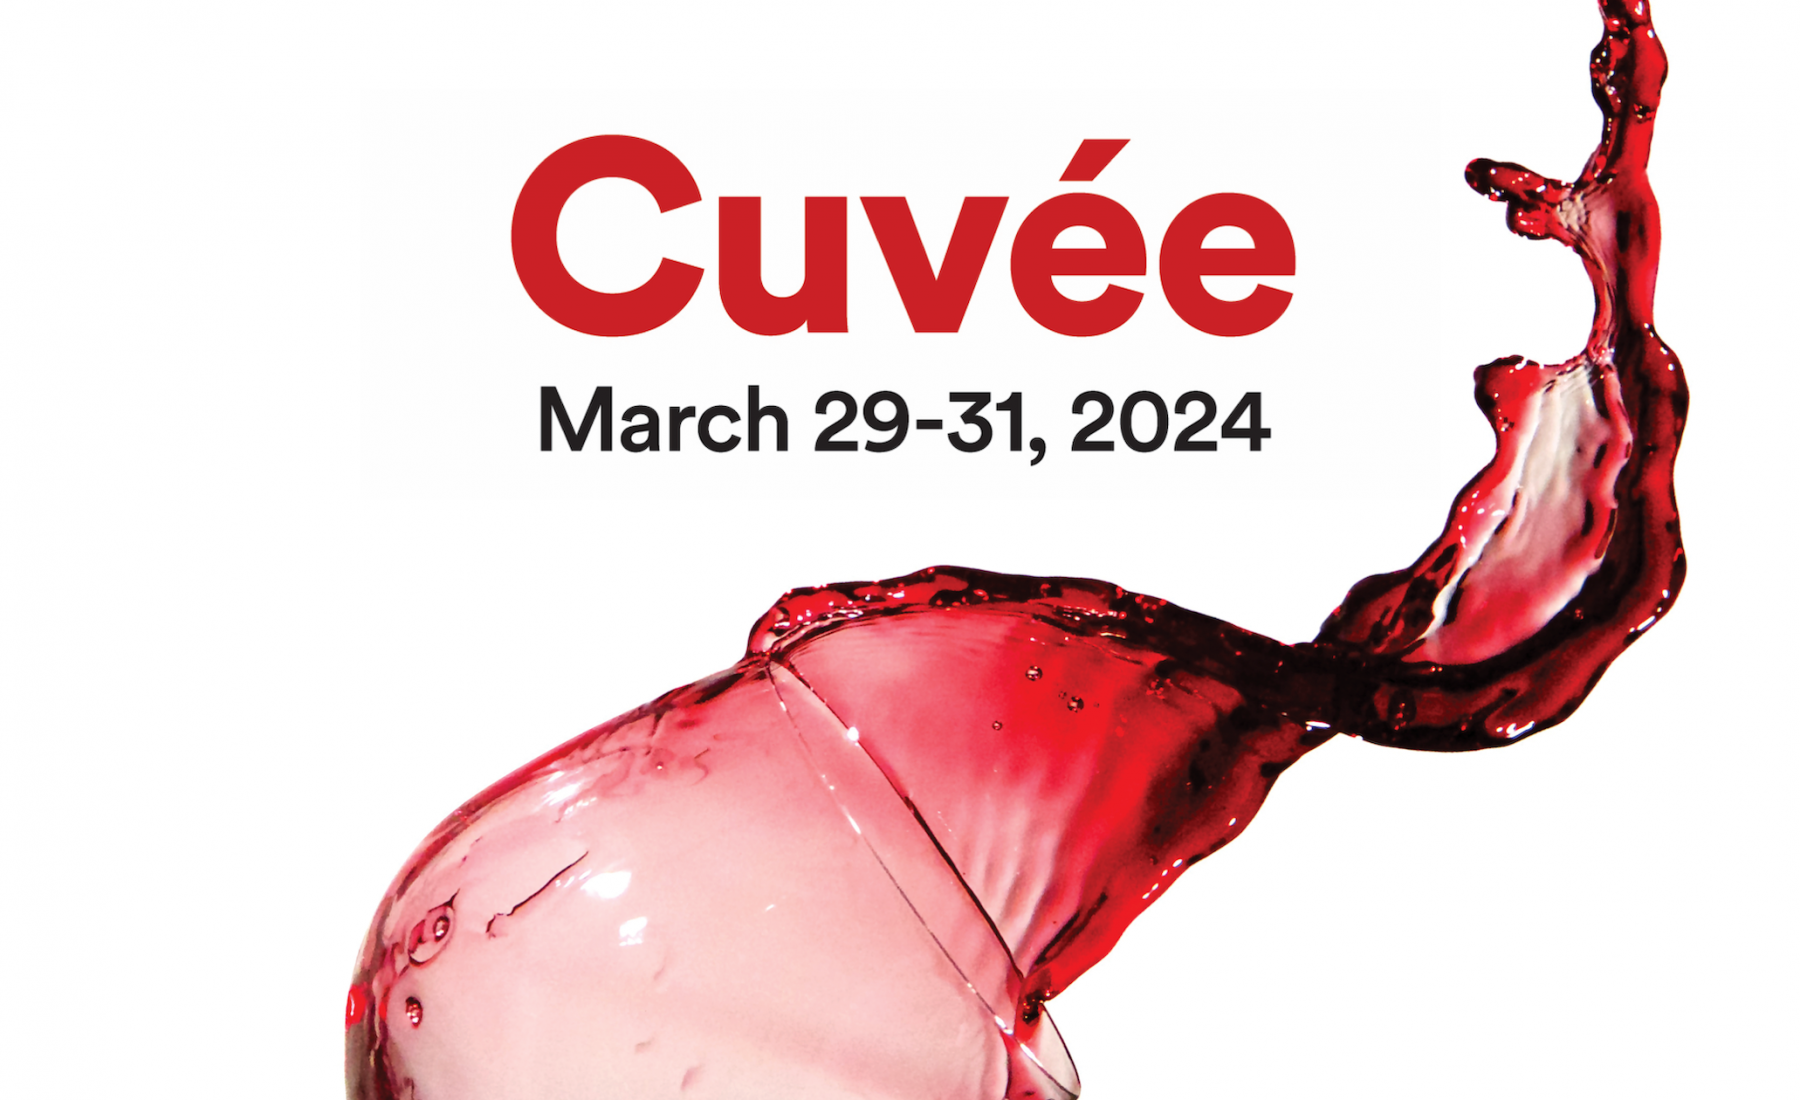 Image of a glass of wine splashing with the text Cuvée March 29-31, 2024 